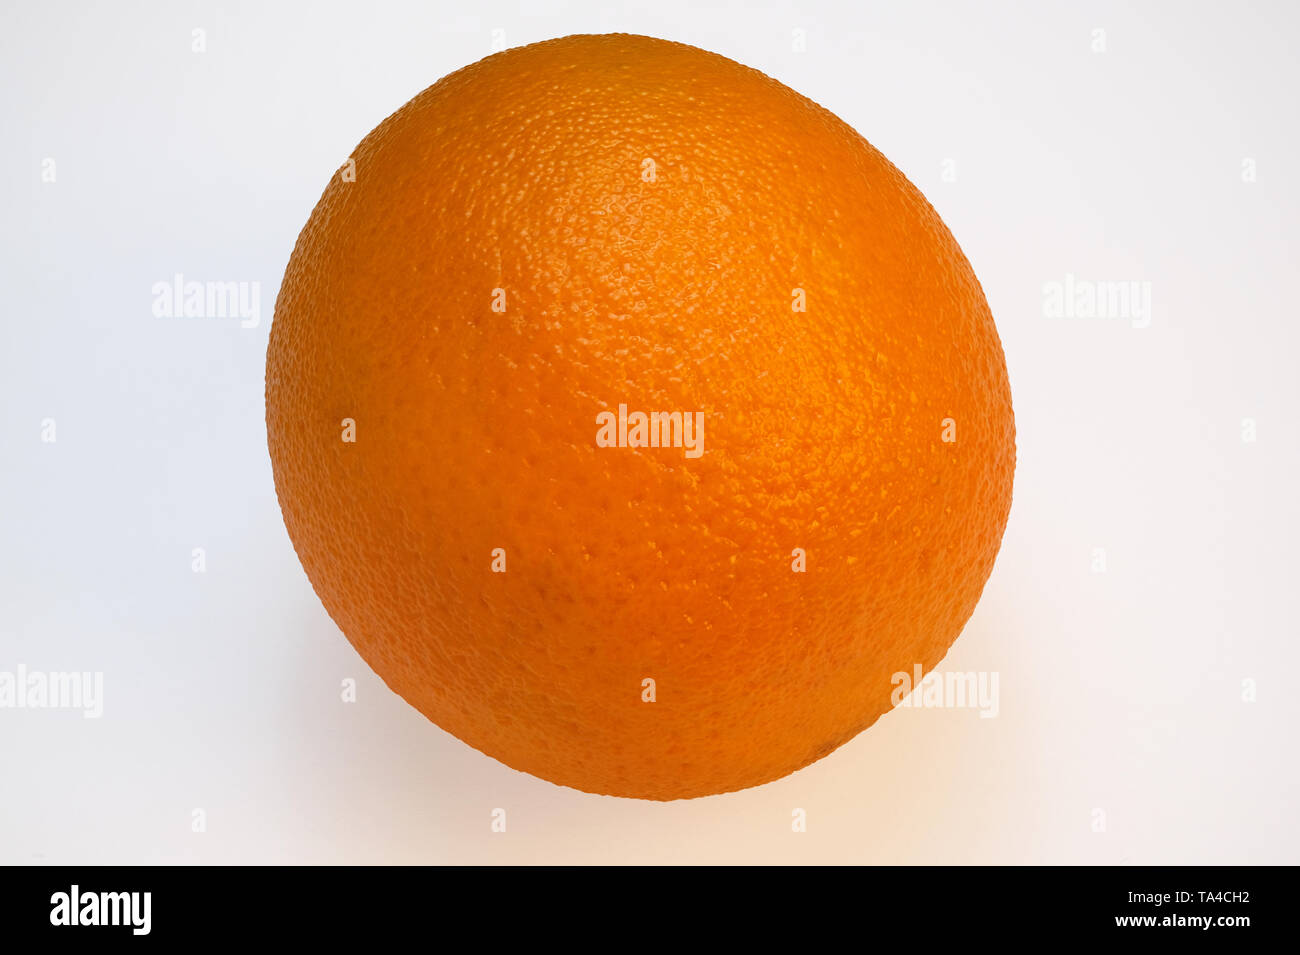 Whole ripe sweet orange close-up on a white background macro photo with a large depth of field Stock Photo